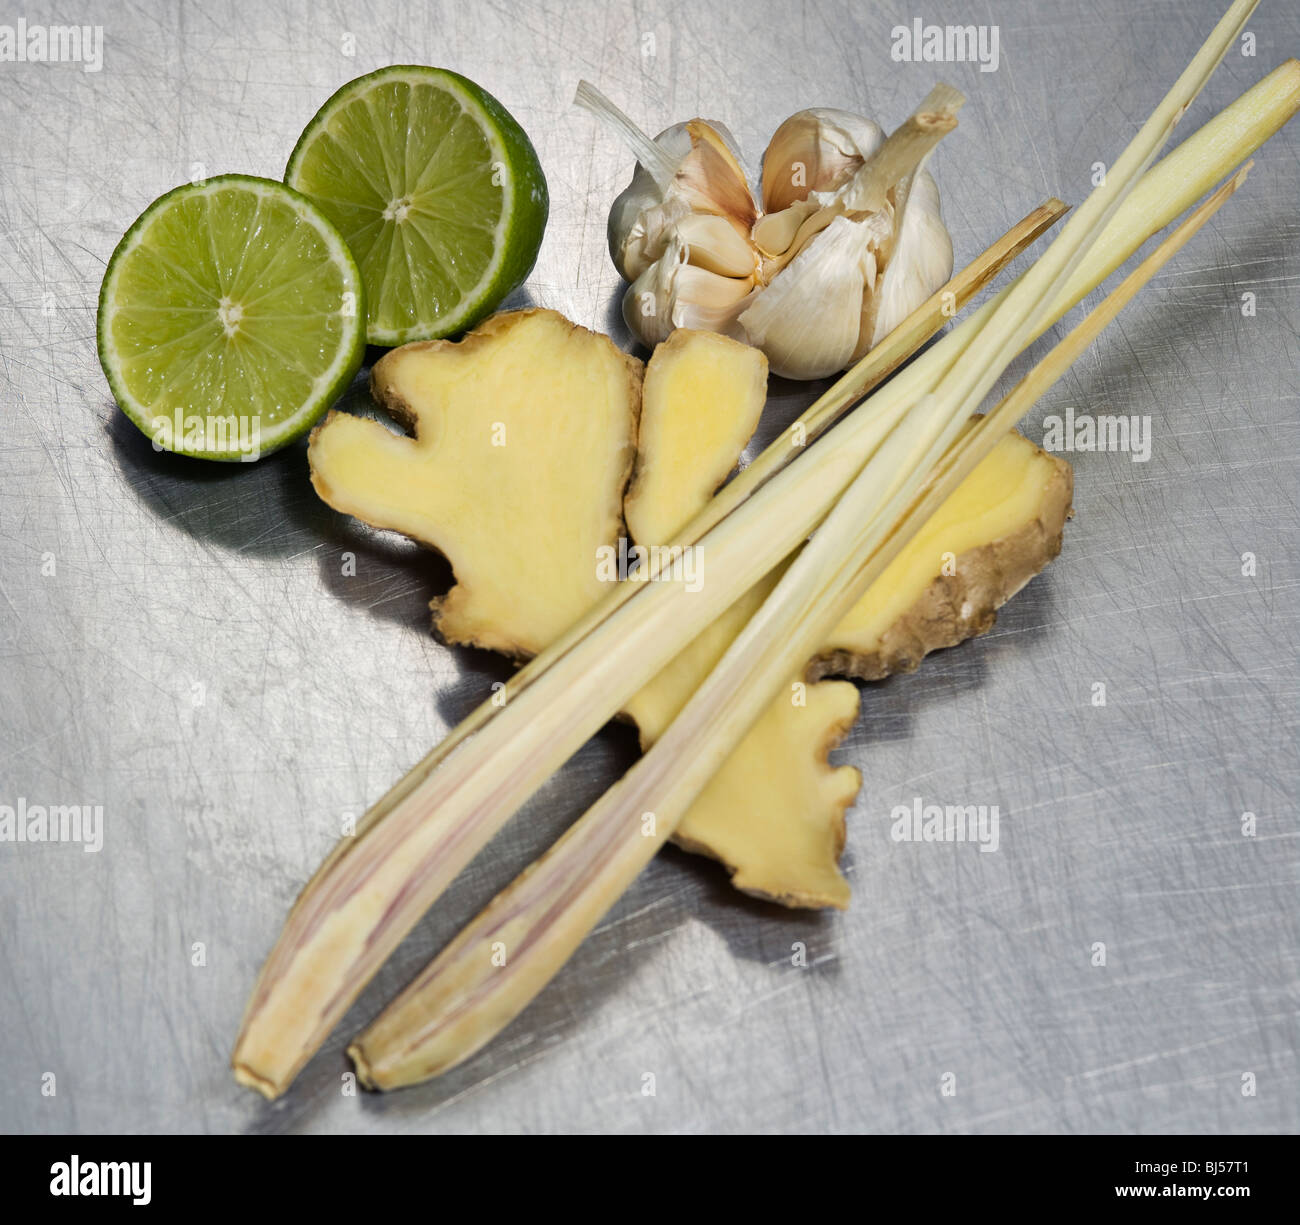 Cooking ingredients on a steel surface Stock Photo